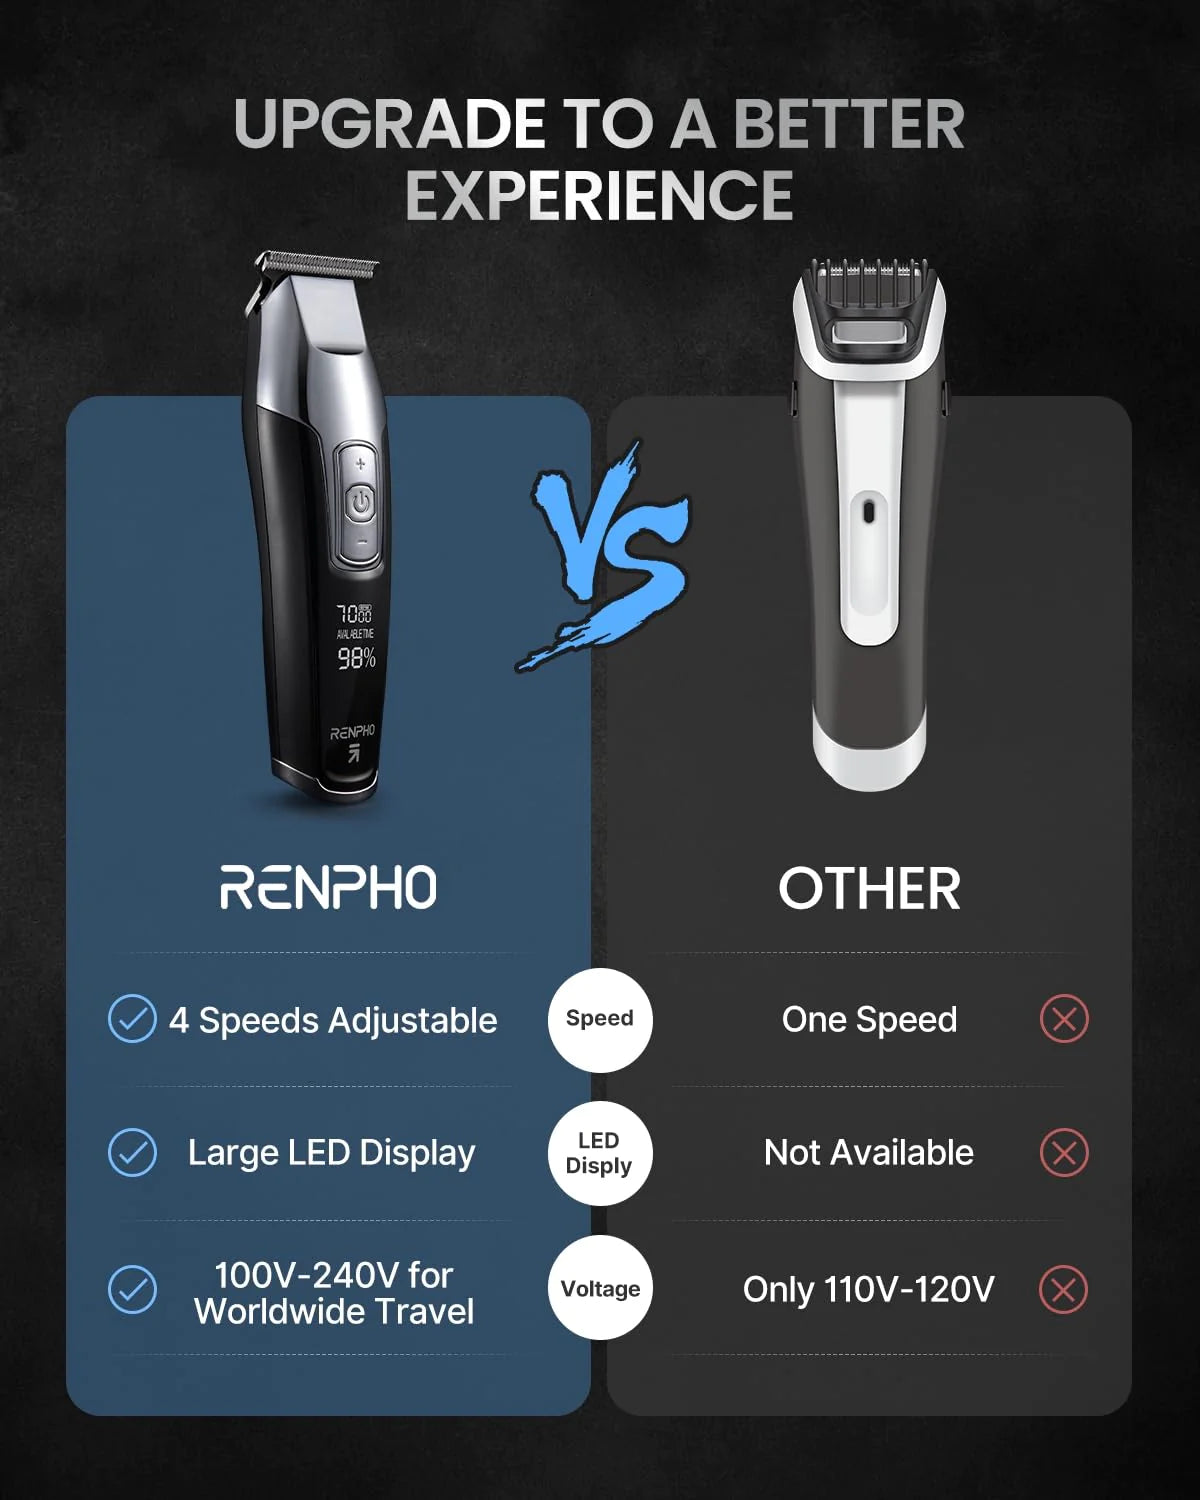 A promotional image comparing two Professional Cordless Hair Trimmers. The left trimmer, labeled "Renpho EU," features adjustable speeds, a large LED display, and wide voltage range. The right, labeled "Other.